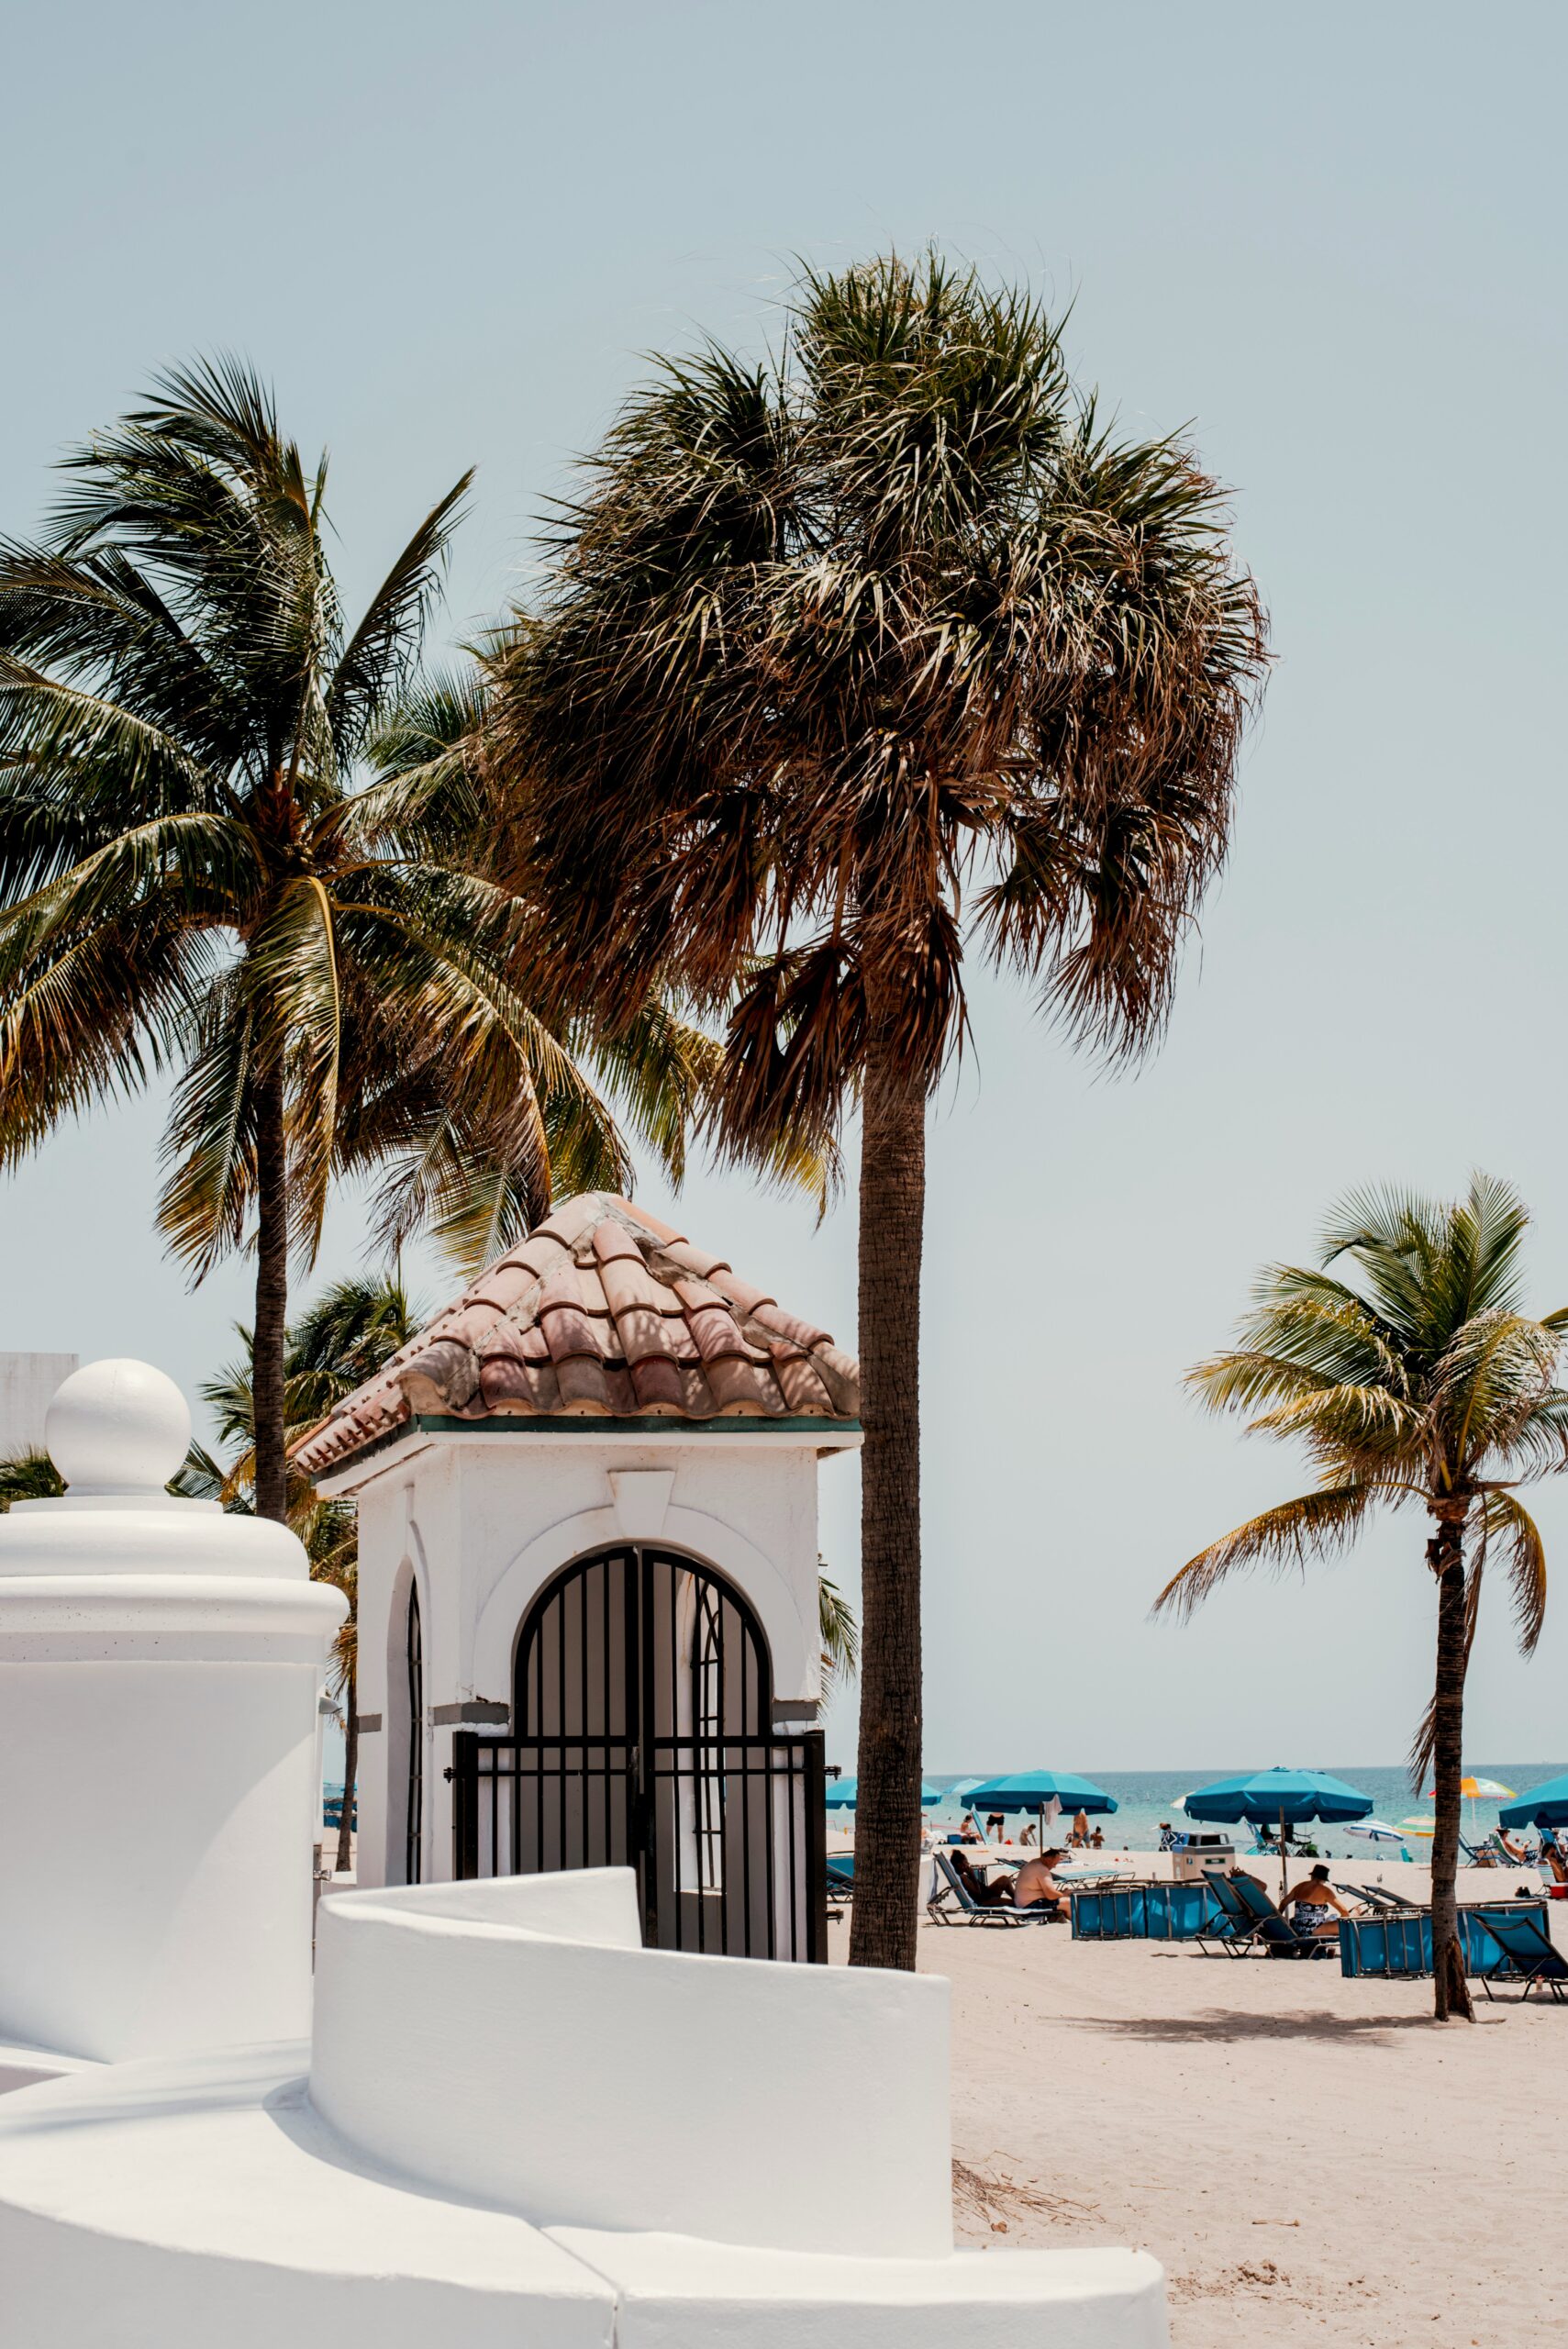 A Complete Guide: Best Things to Do in Fort Lauderdale